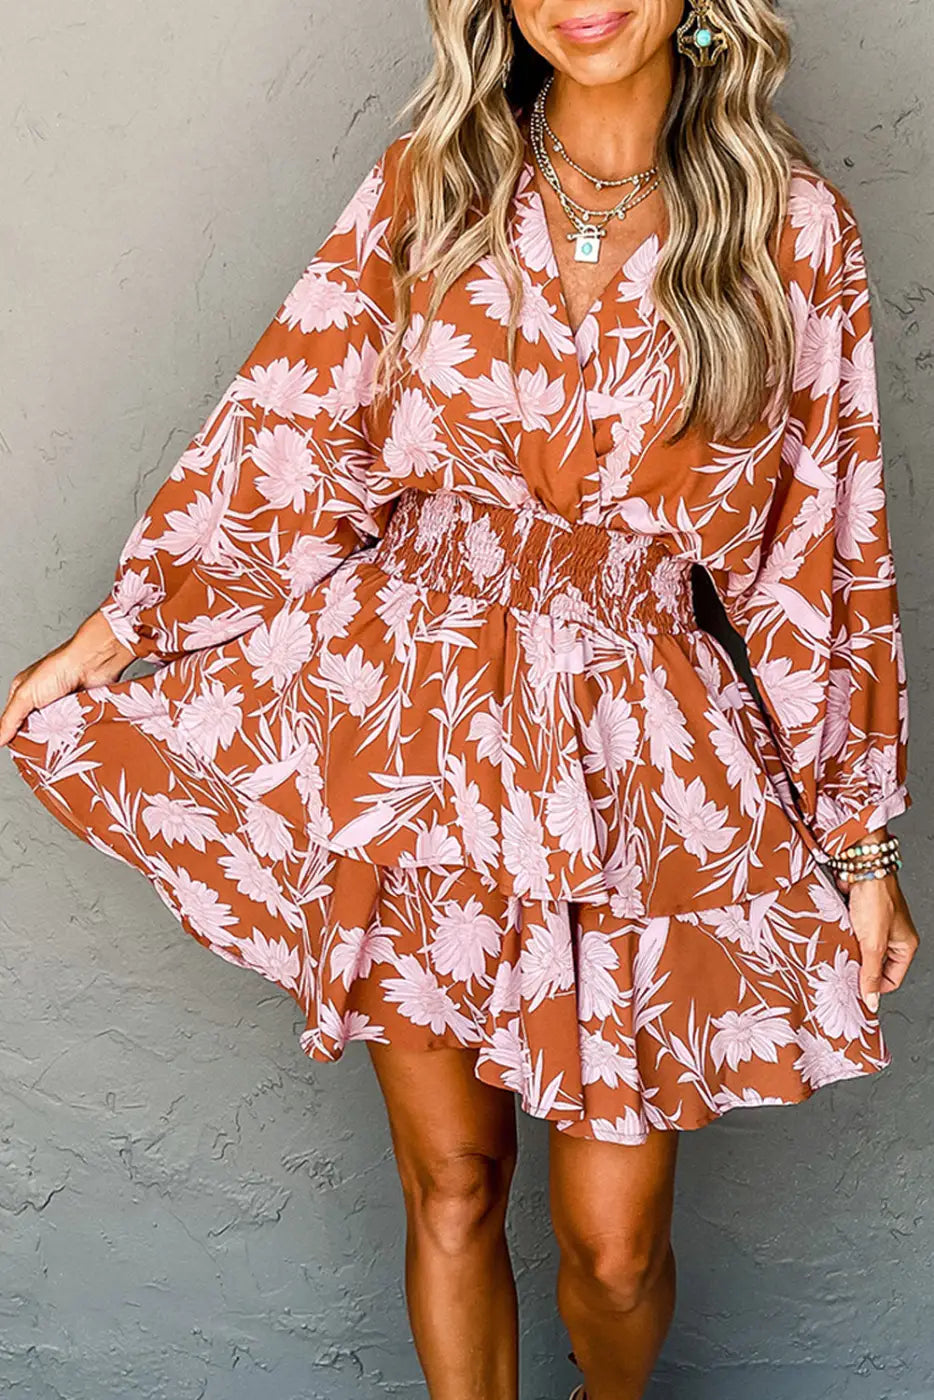 Rosette whimsy smocked dress: floral print wrap dress in rust orange and pink tones